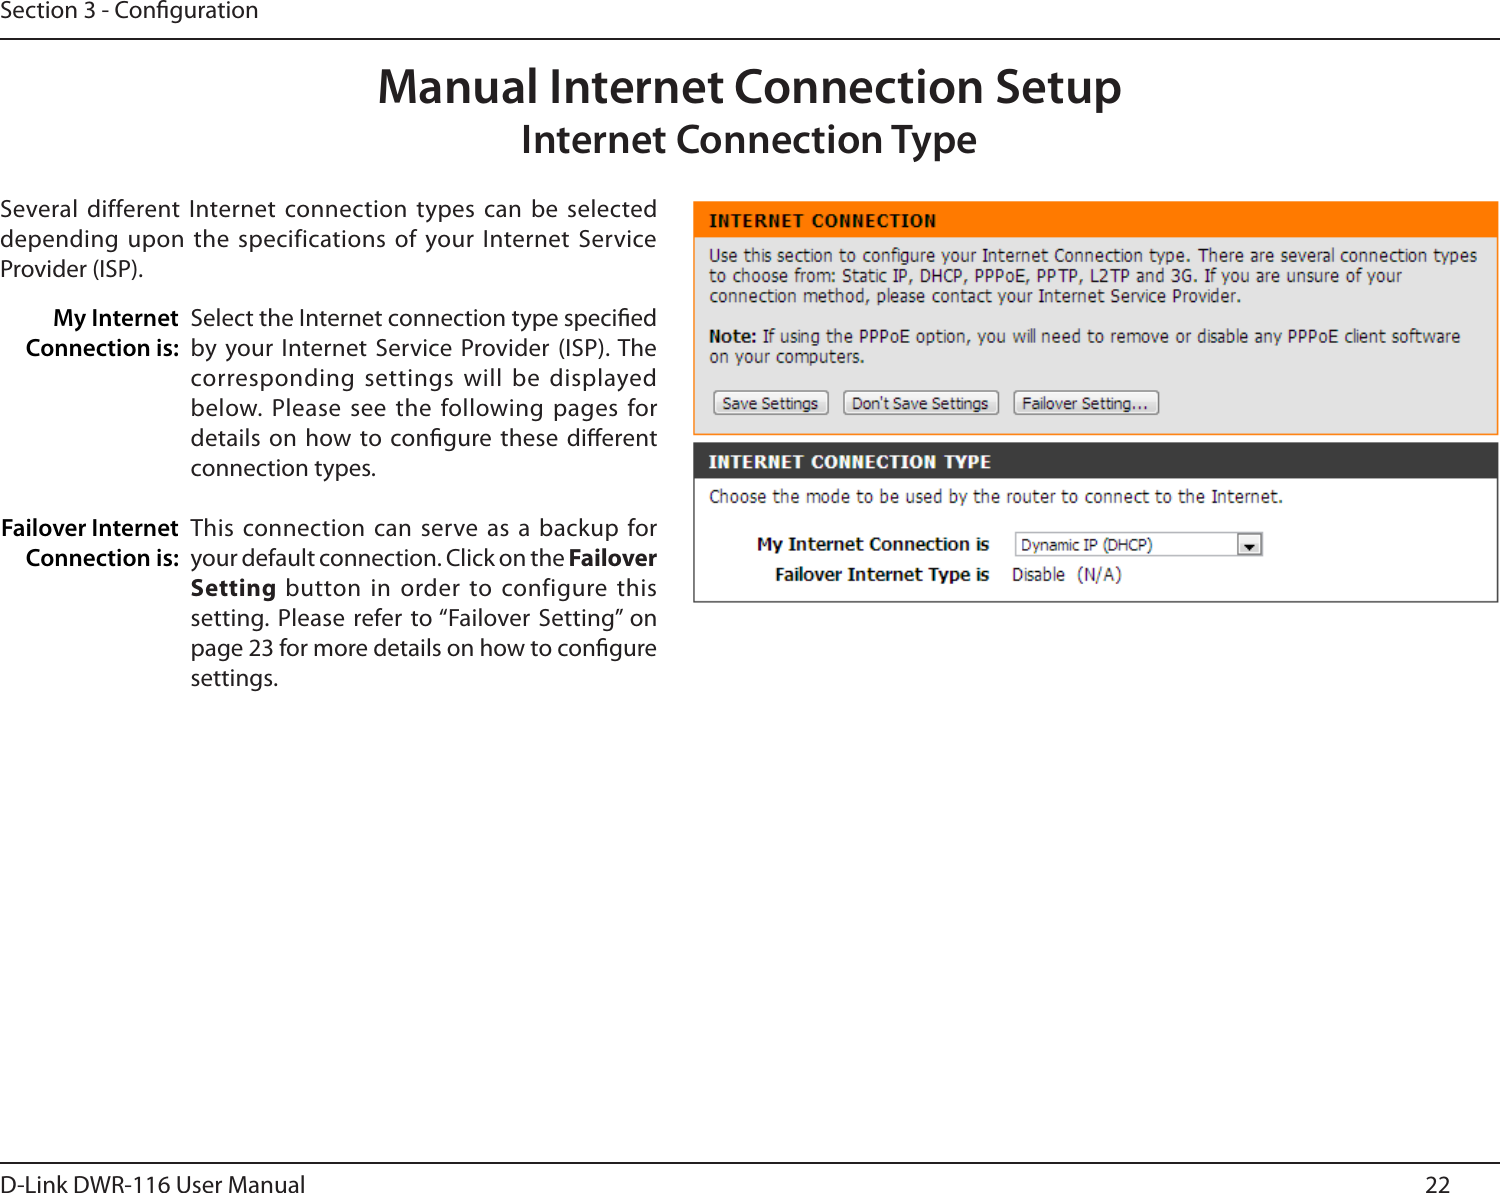 22D-Link DWR-116 User ManualSection 3 - CongurationManual Internet Connection SetupInternet Connection TypeSeveral different Internet connection  types can be selected depending upon  the specifications of  your Internet Service Provider (ISP).Select the Internet connection type specied by  your  Internet  Service Provider  (ISP). The corresponding settings will  be displayed below. Please  see the following pages for details on  how to congure these dierent connection types.This connection  can serve as a backup for your default connection. Click on the Failover Setting button in order to configure this setting. Please refer to “Failover Setting” on page 23 for more details on how to congure settings.My Internet Connection is:Failover Internet Connection is: